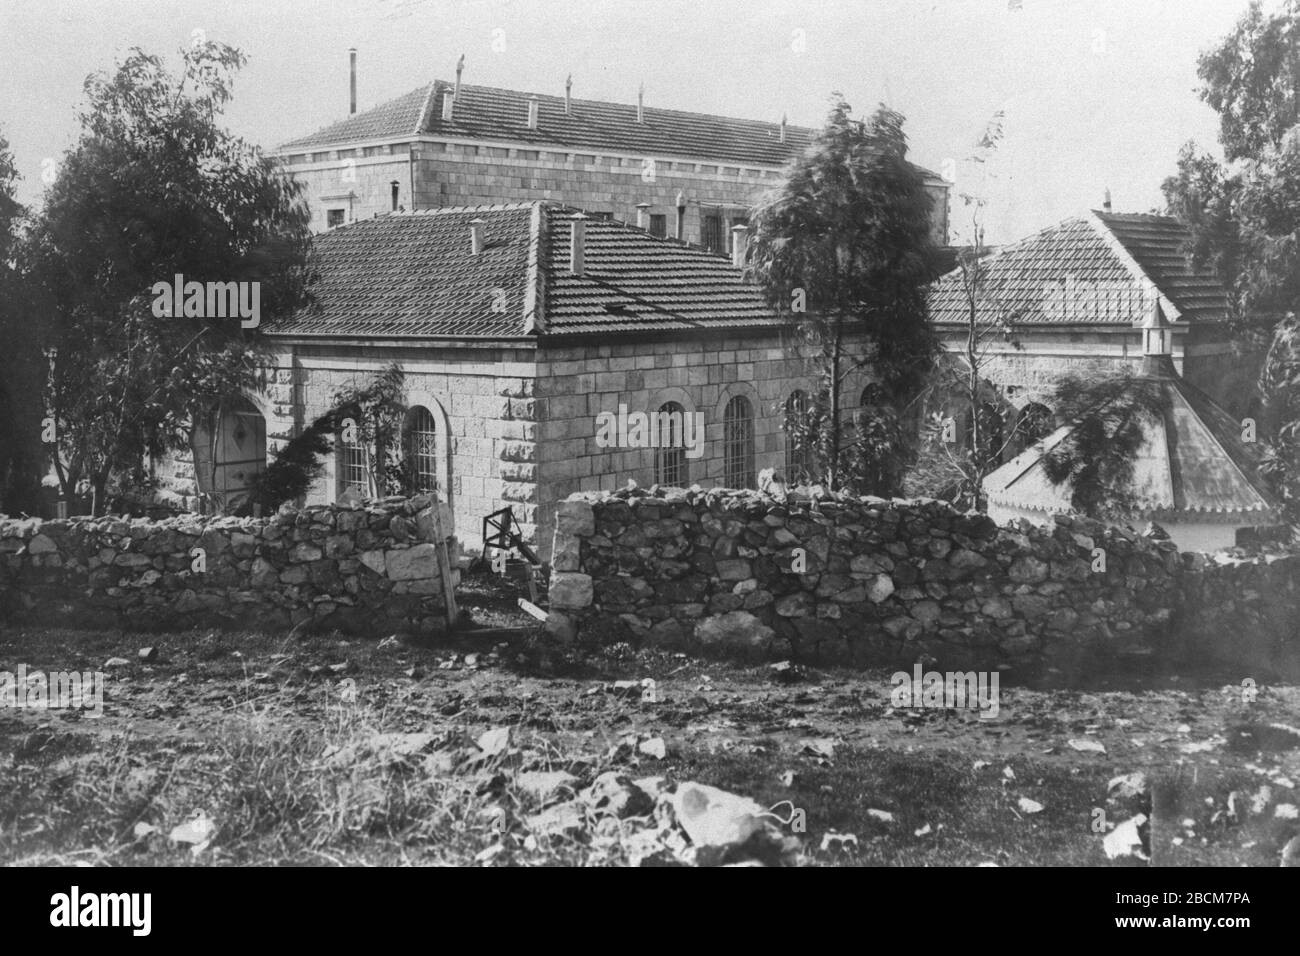 English The Old Age Home On Jaffa Street In Jerusalem During The Ottoman Era In The Land Of Israel O U I U U I C E I N Ss O U I I N Ss I E O E E I E O I E O I E O I C U O U